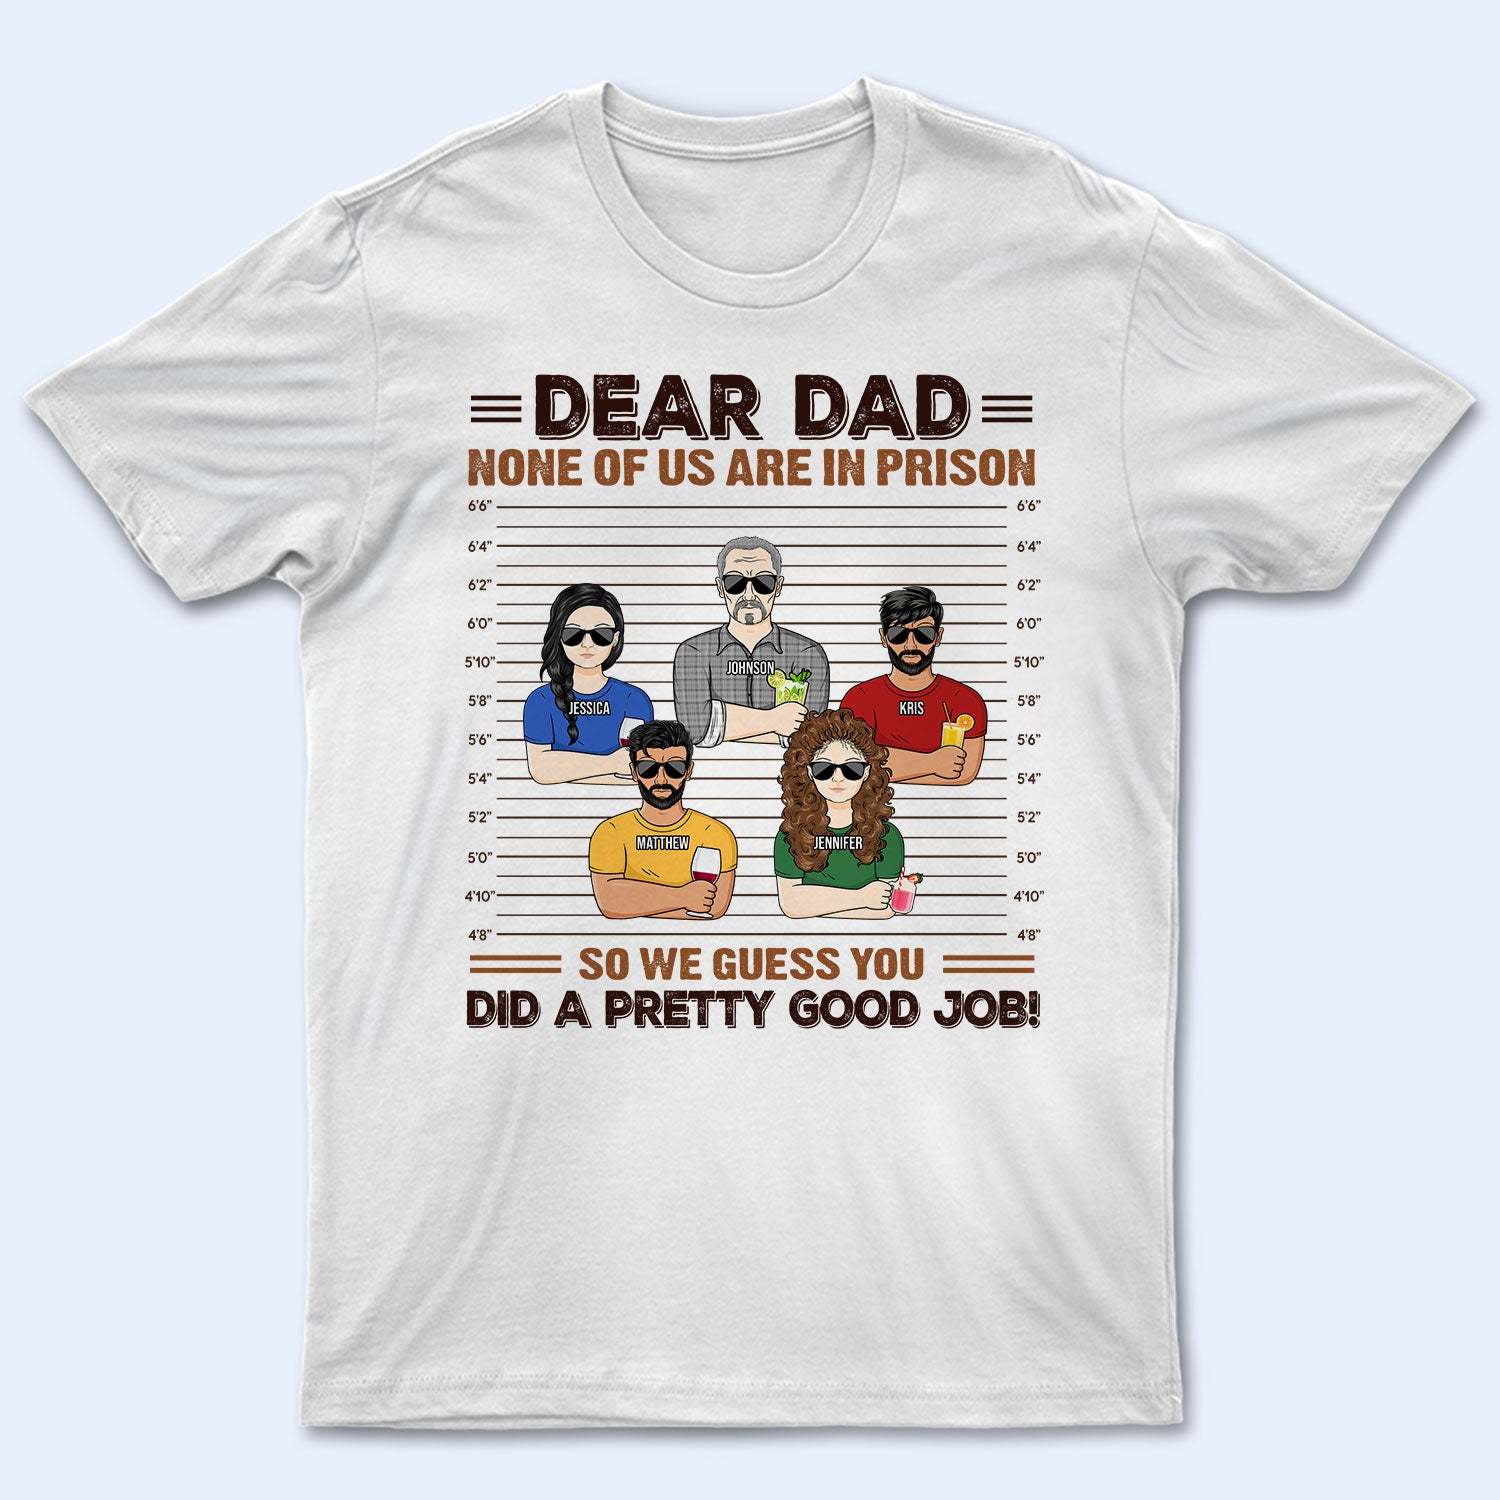 We Guess You Did A Good Job - Gift For Father, Dad, Grandpa - Personalized Custom T Shirt